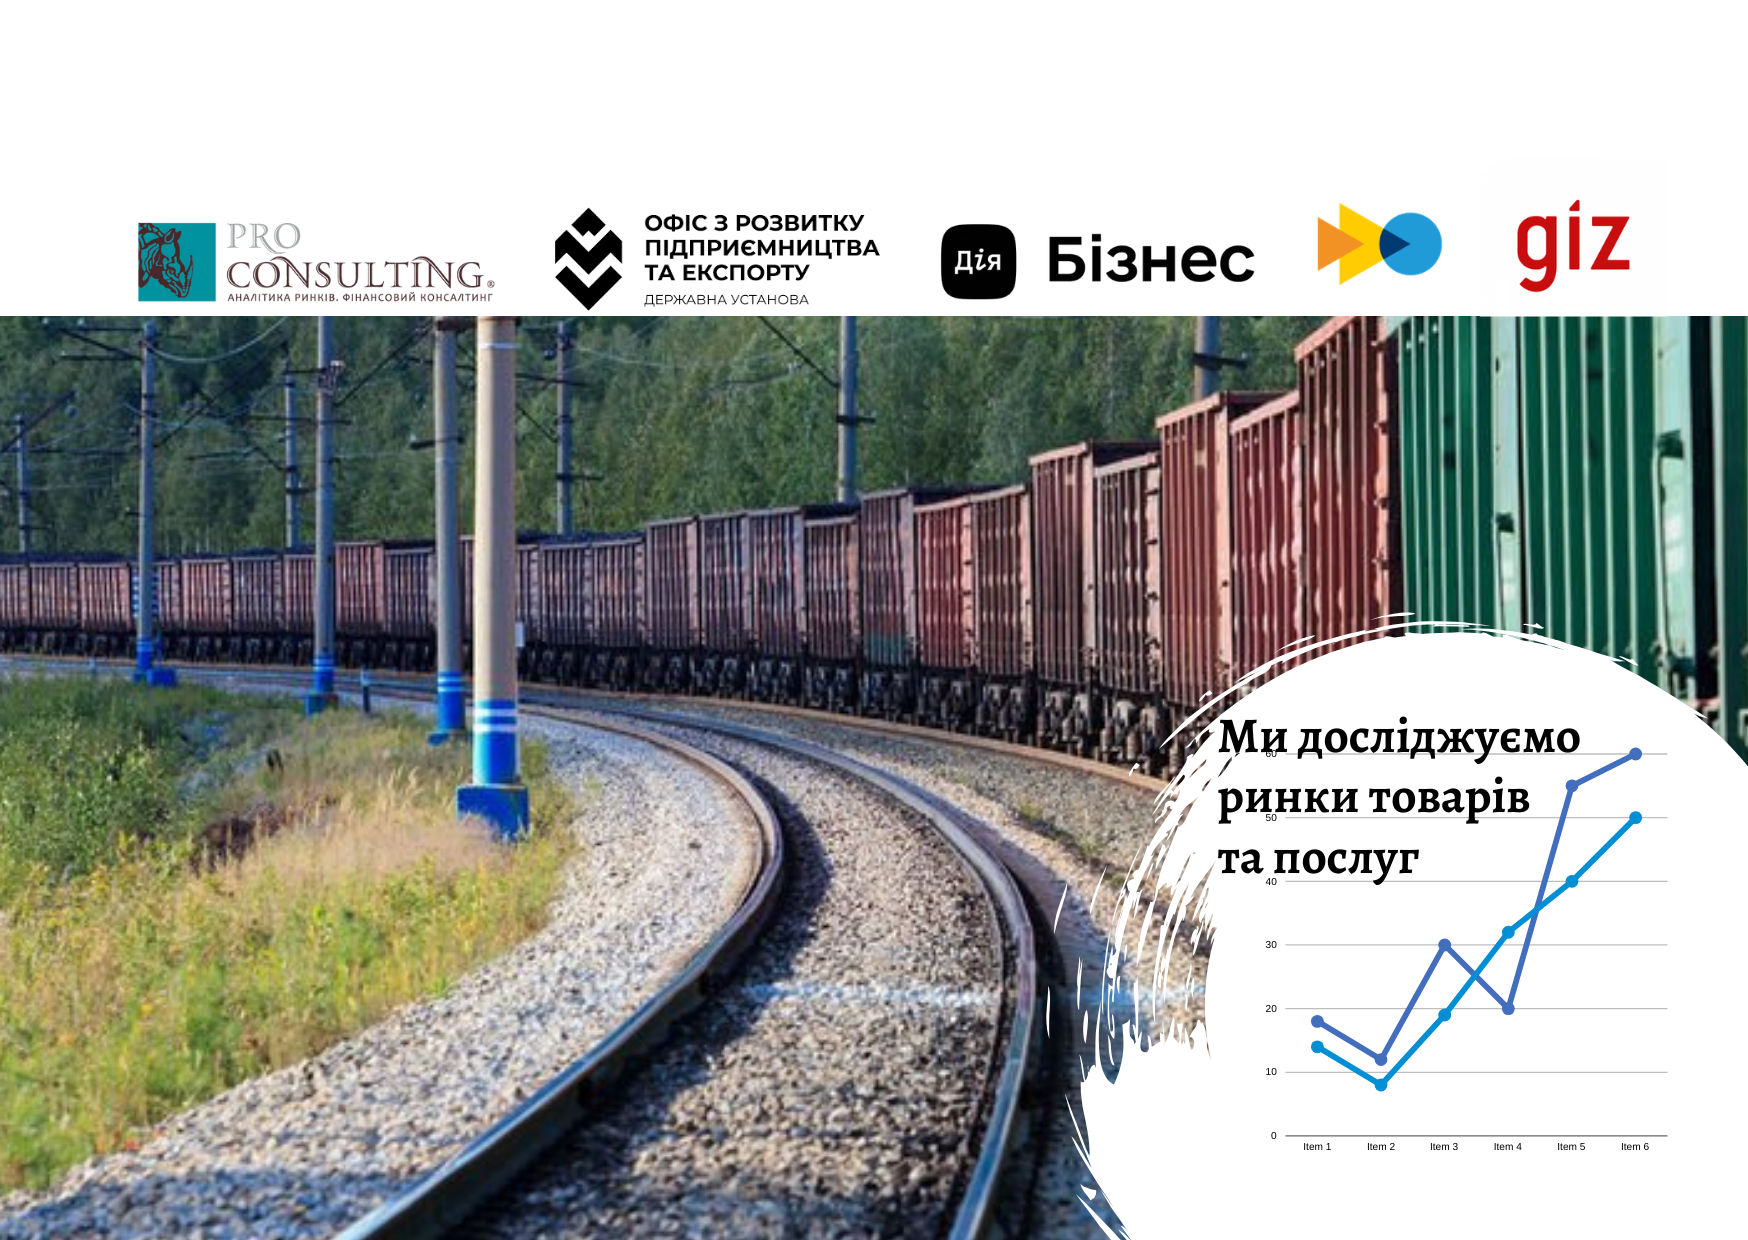 The railway equipment market overview in Ukraine - opportunities for manufacturers – Pro-Consulting Company